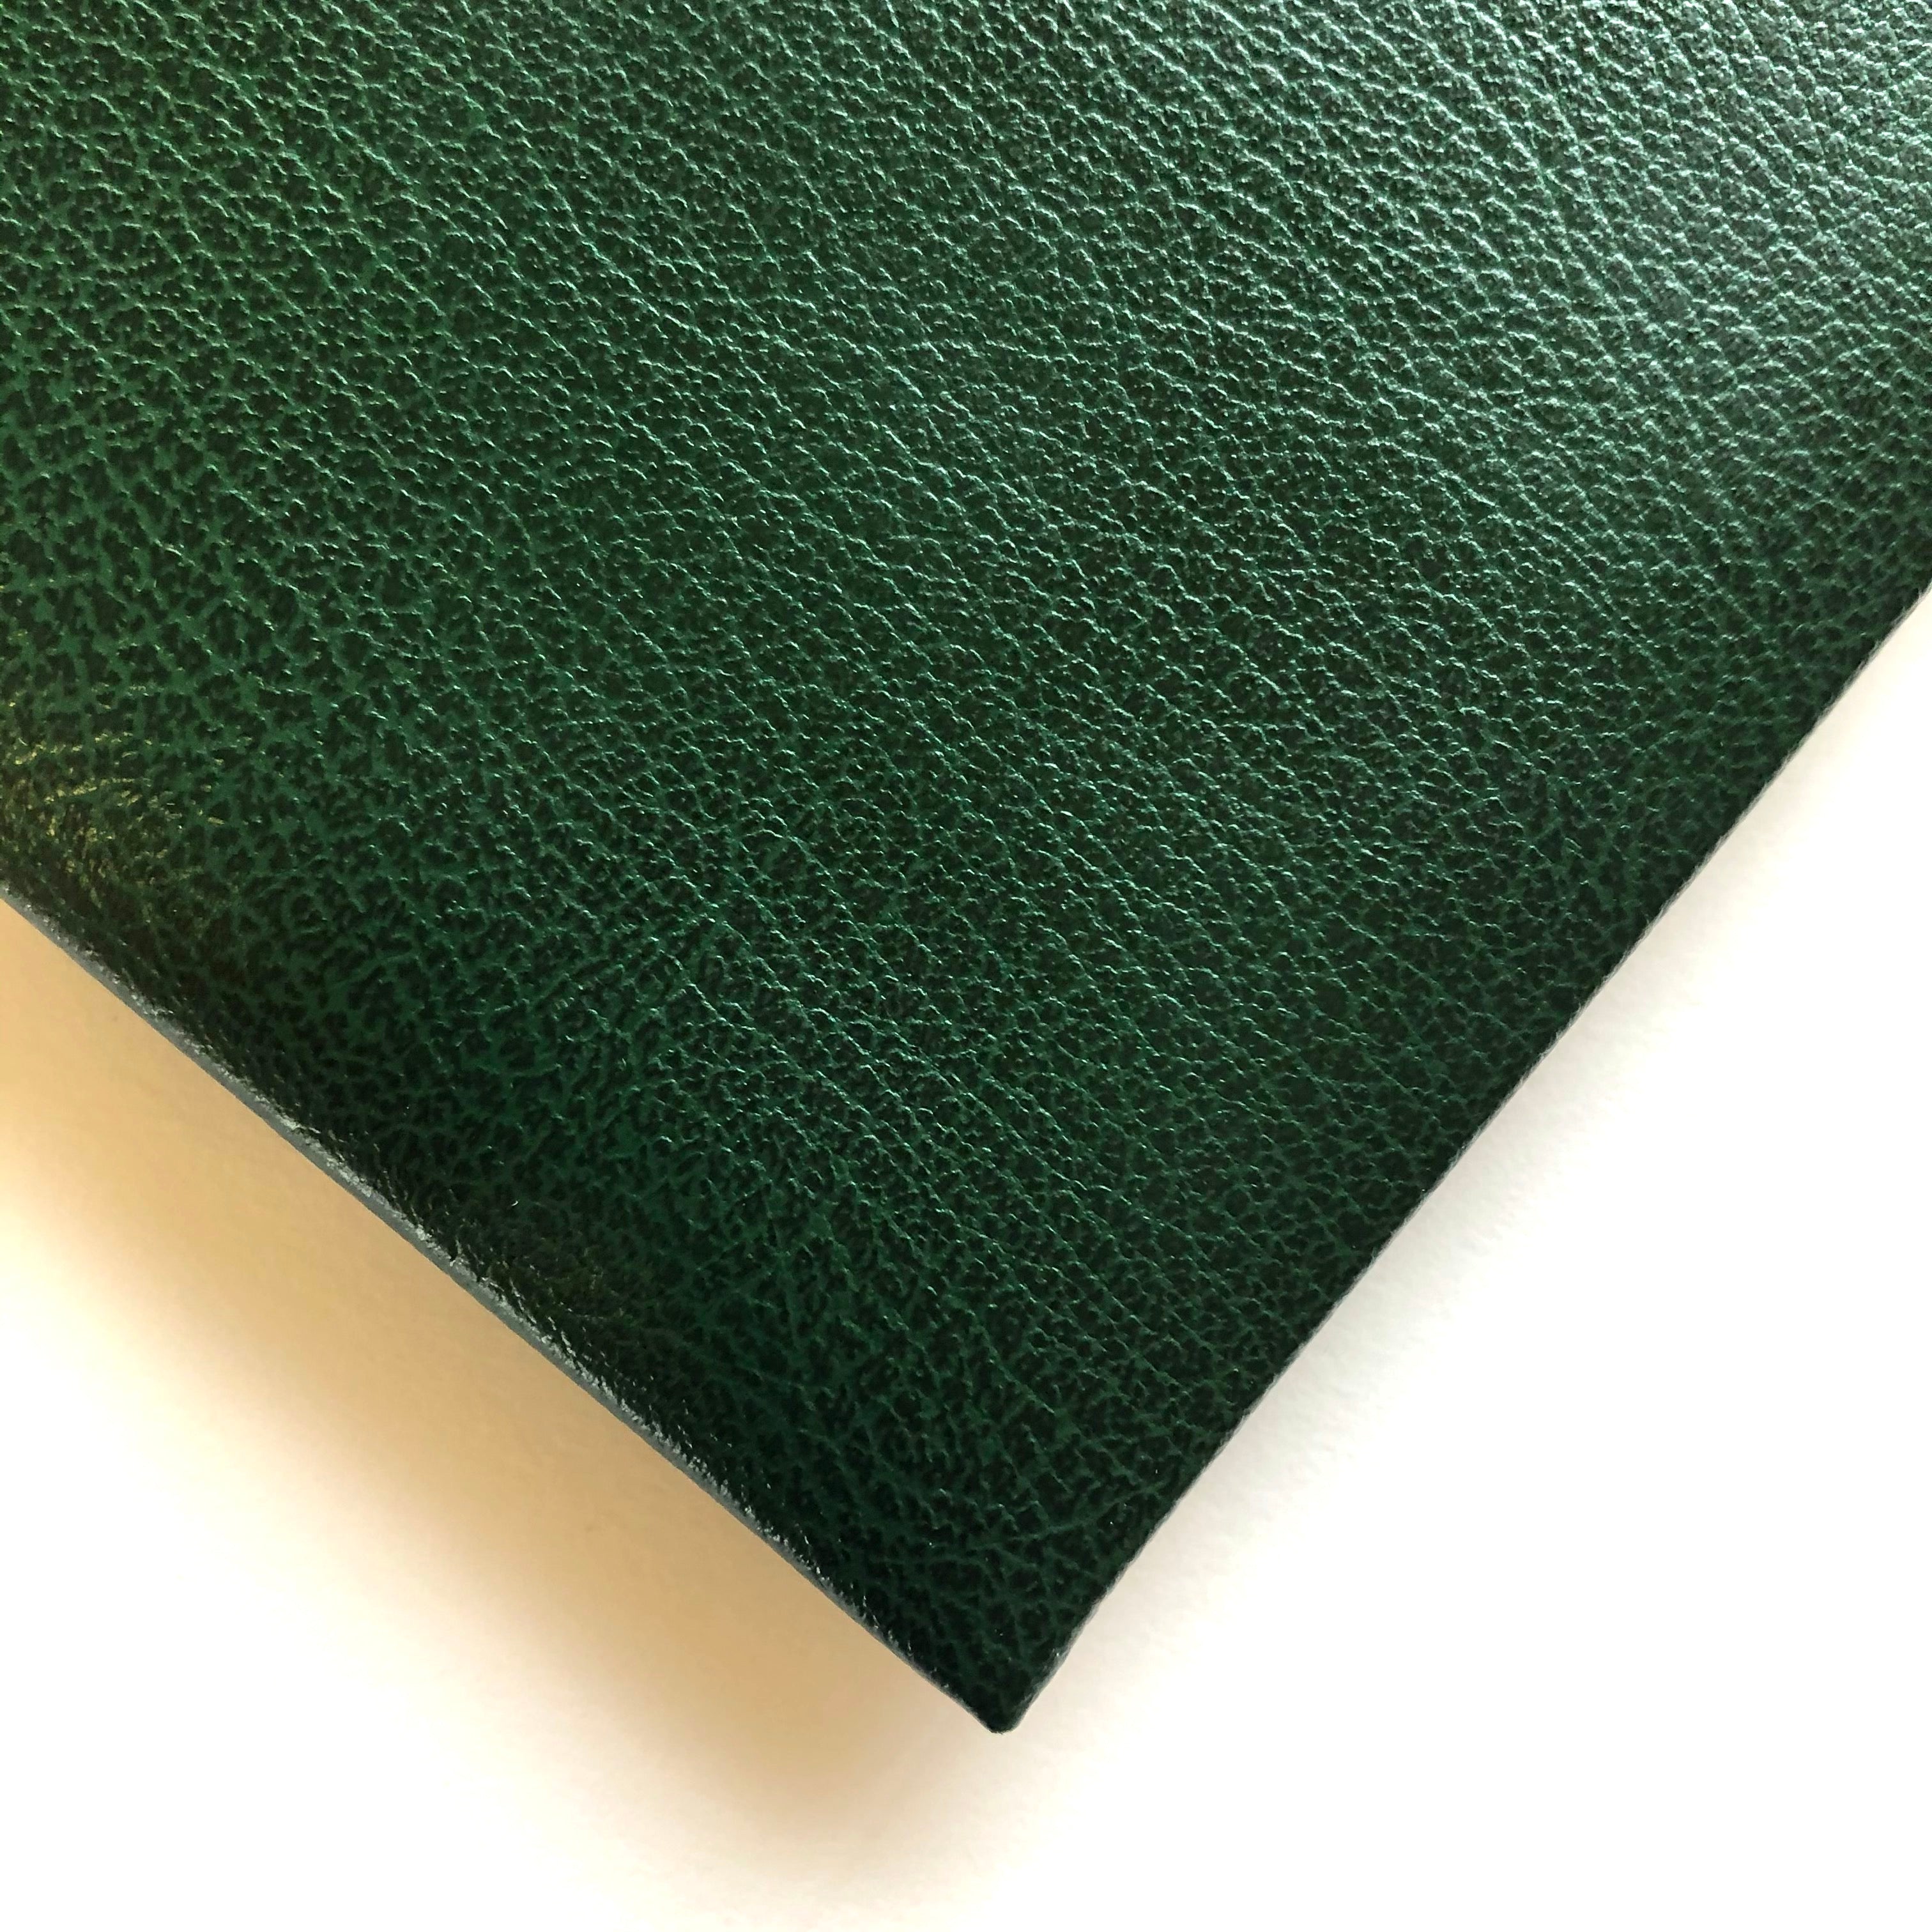 Swatch of Green Leather Visitors Book